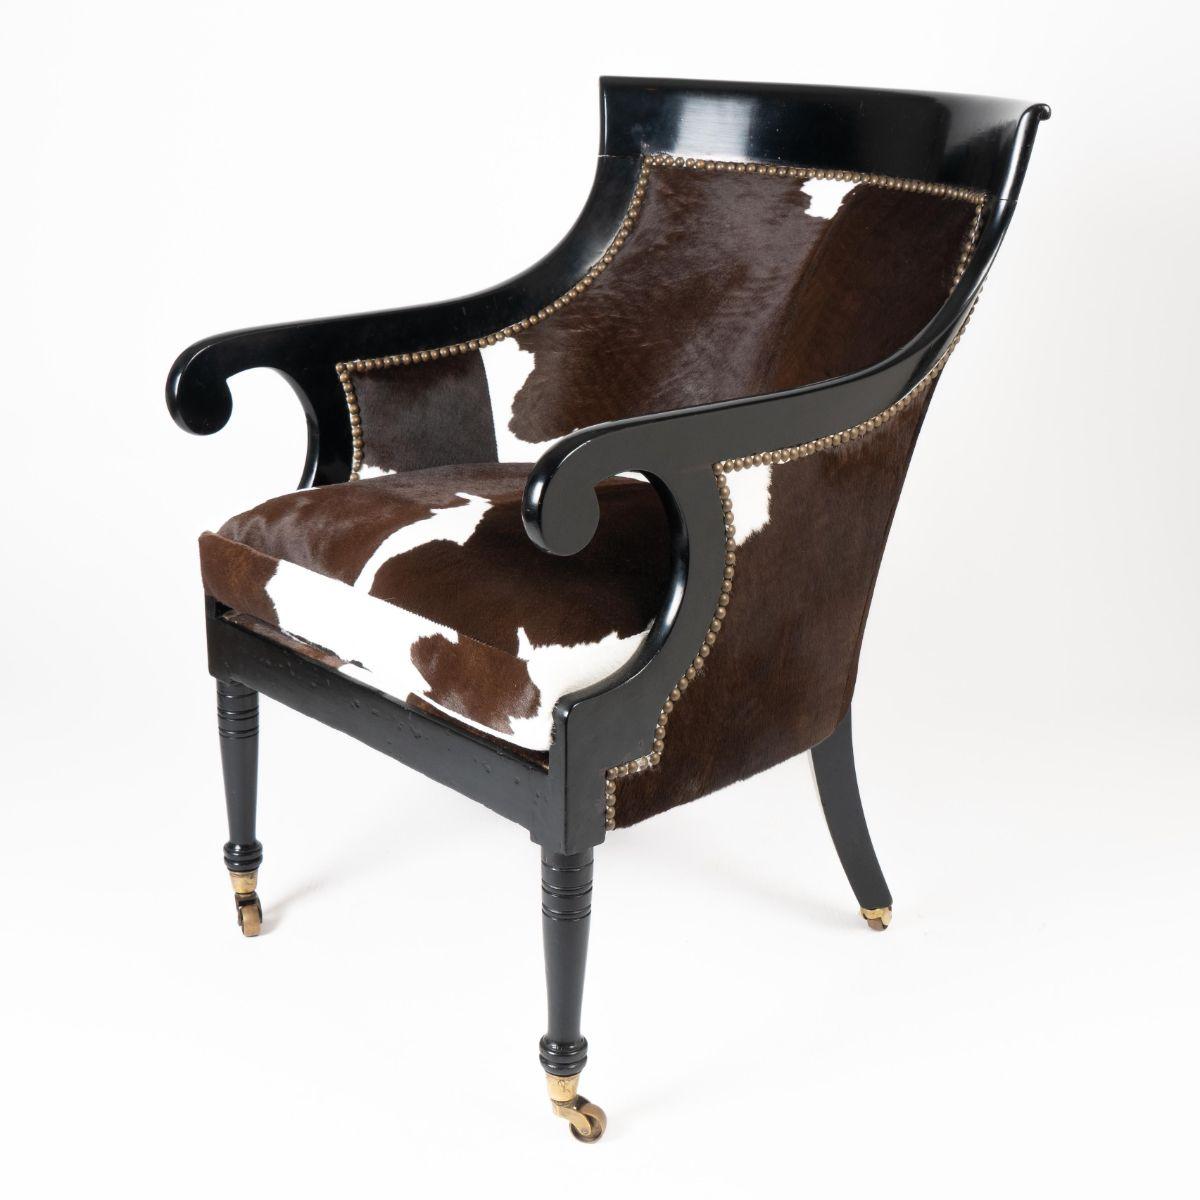 William IV painted mahogany framed gondola arm chair on cast brass castors. The frame is upholstered in chocolate brown and white calf skin hide on horse hair fill.

England, circa 1825.